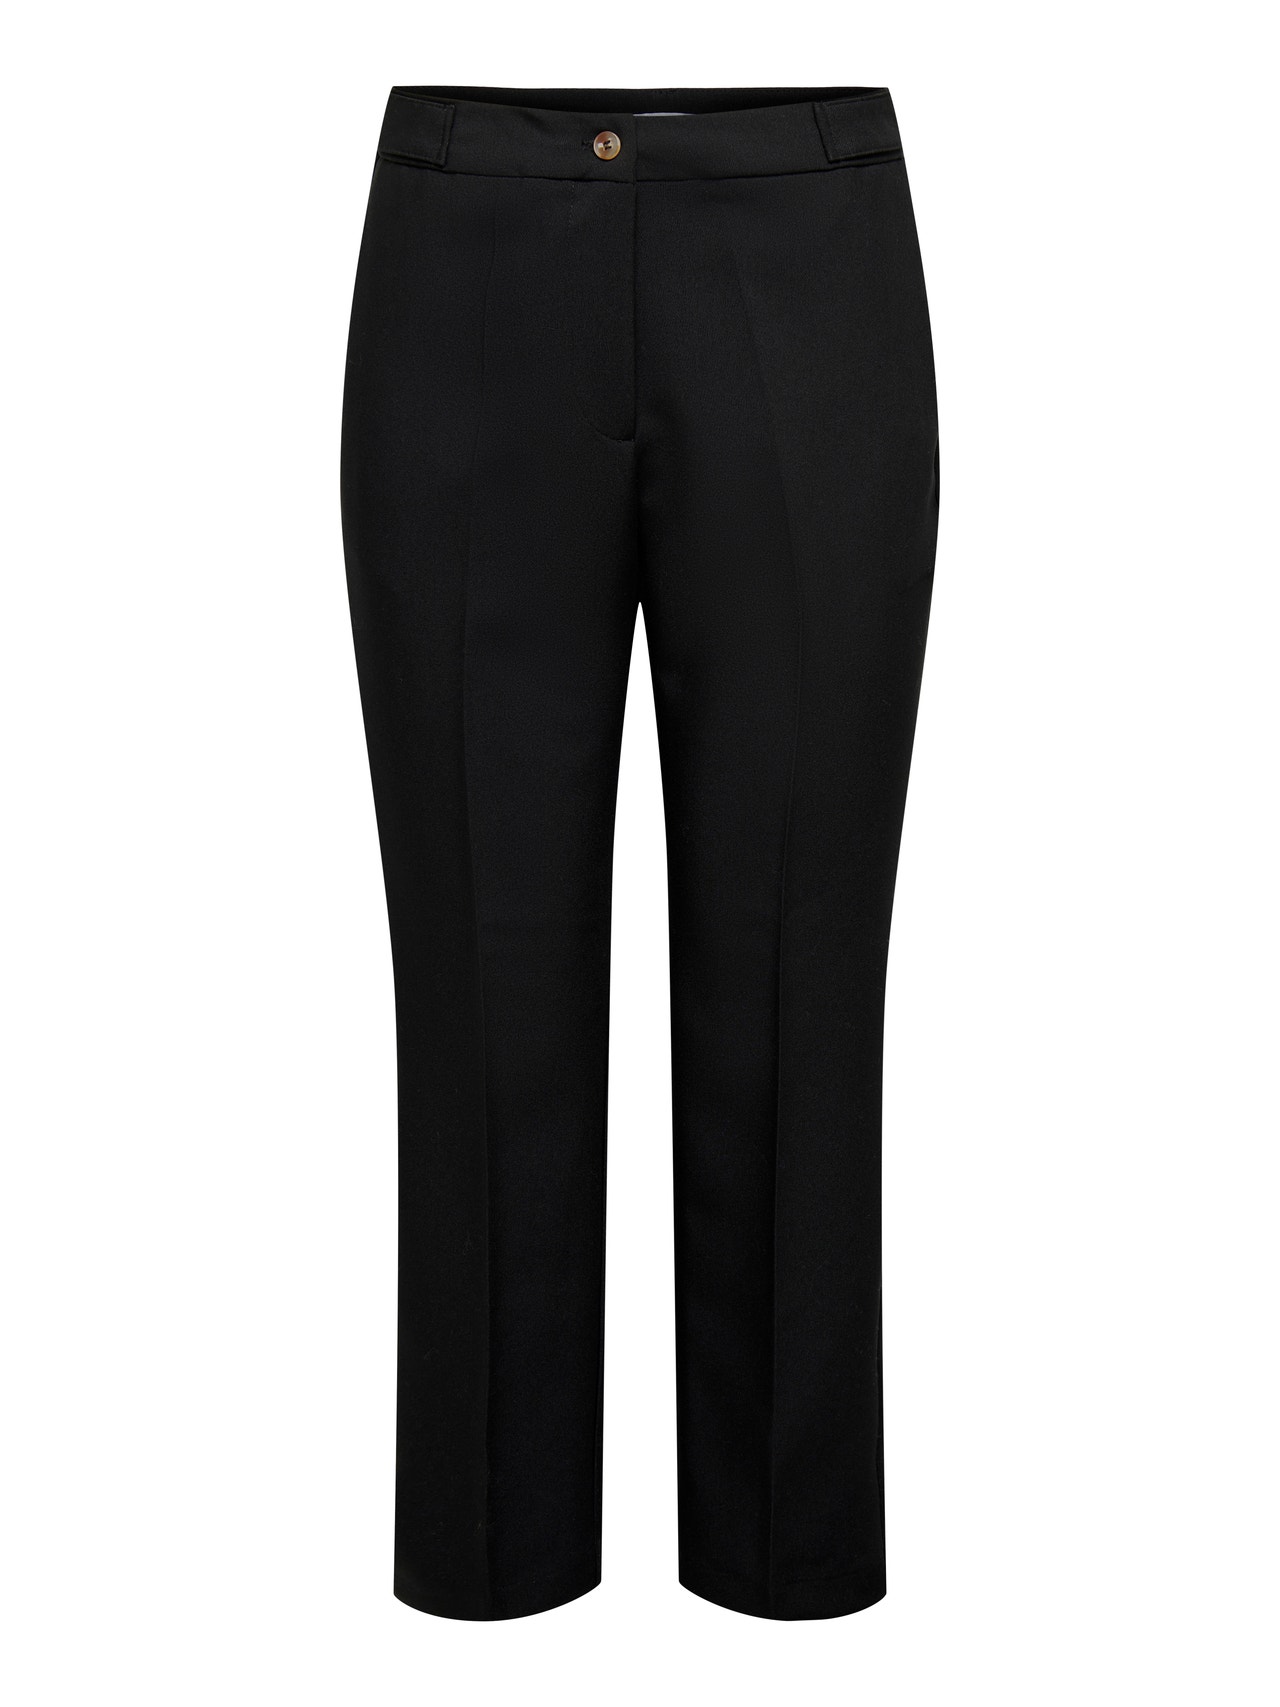 ONLY High Waisted Cigarette Pants -Black - 15279149